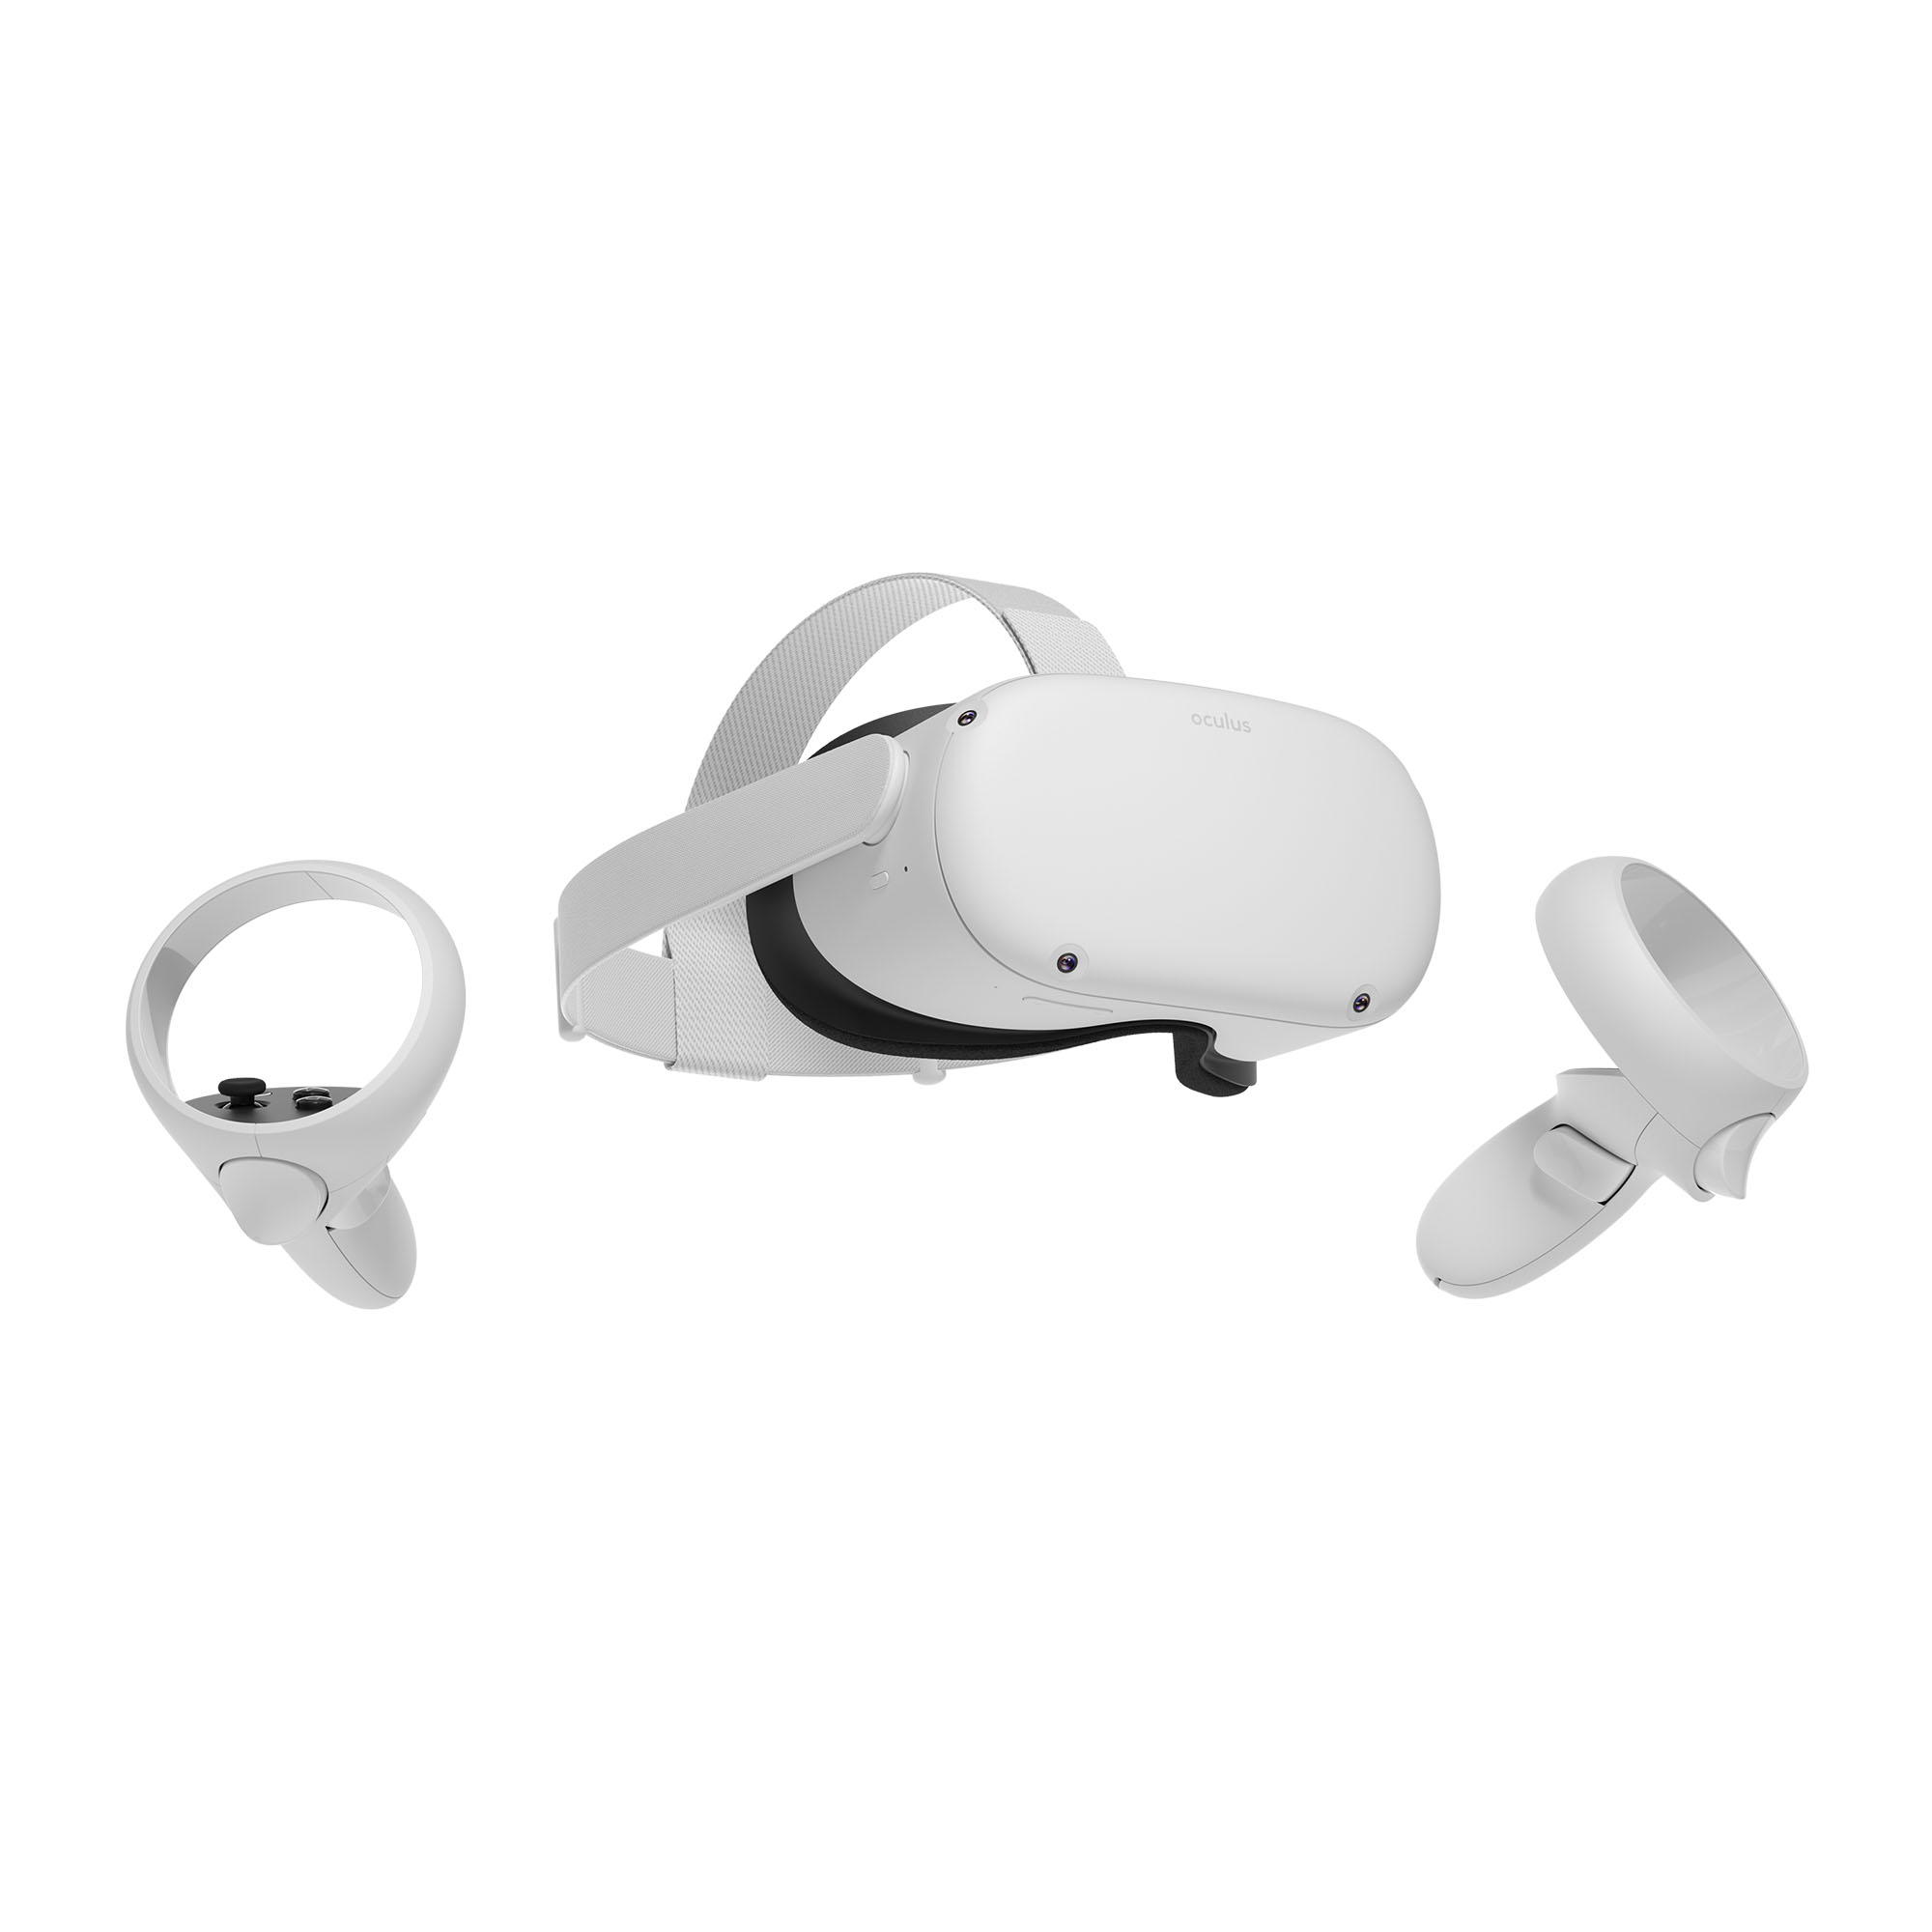 64GB Oculus Quest 2 All-In-One Virtual Reality Headset (Refurb)